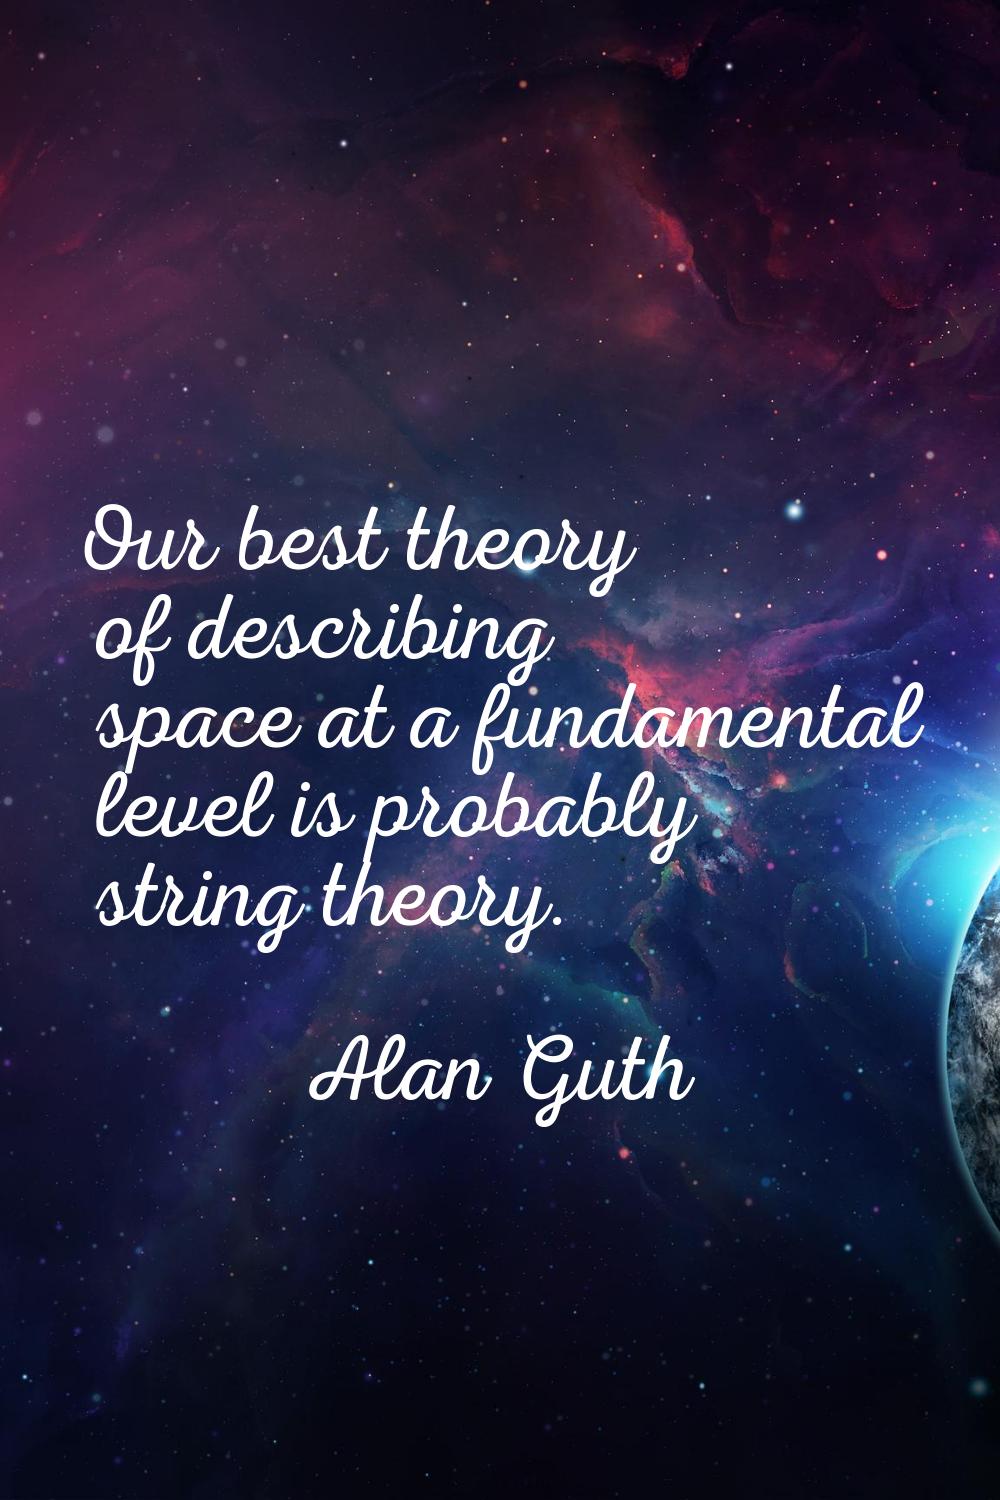 Our best theory of describing space at a fundamental level is probably string theory.